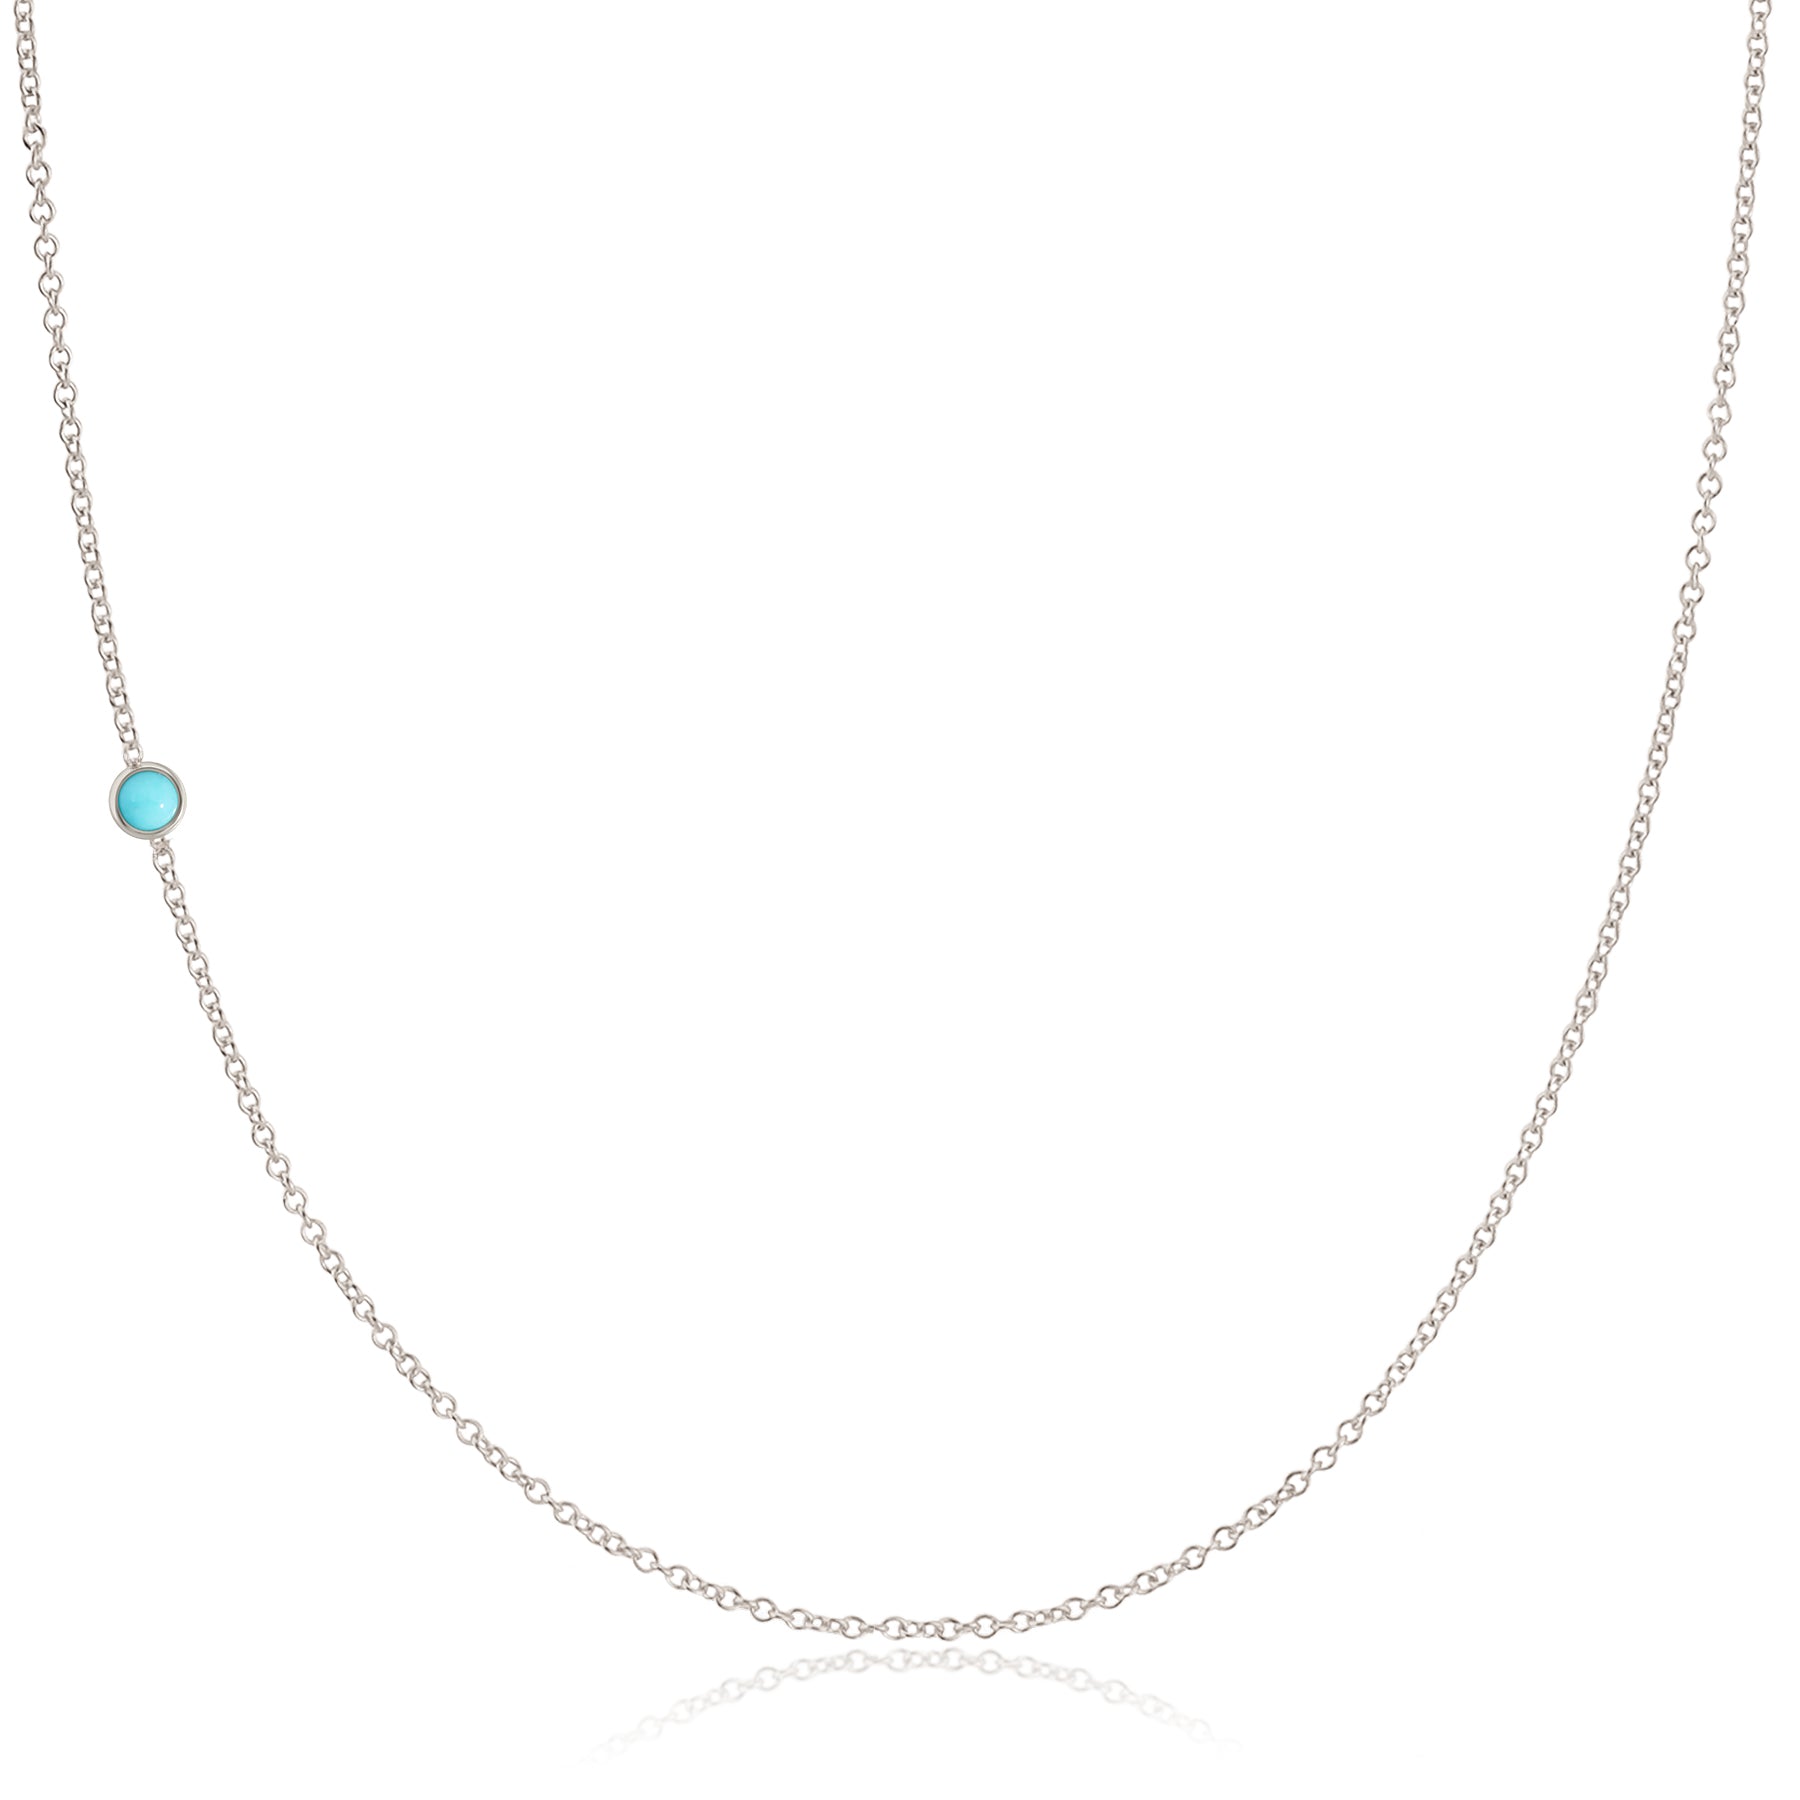 14K Gold Asymmetrical Birthstone Necklace - Turquoise (December)